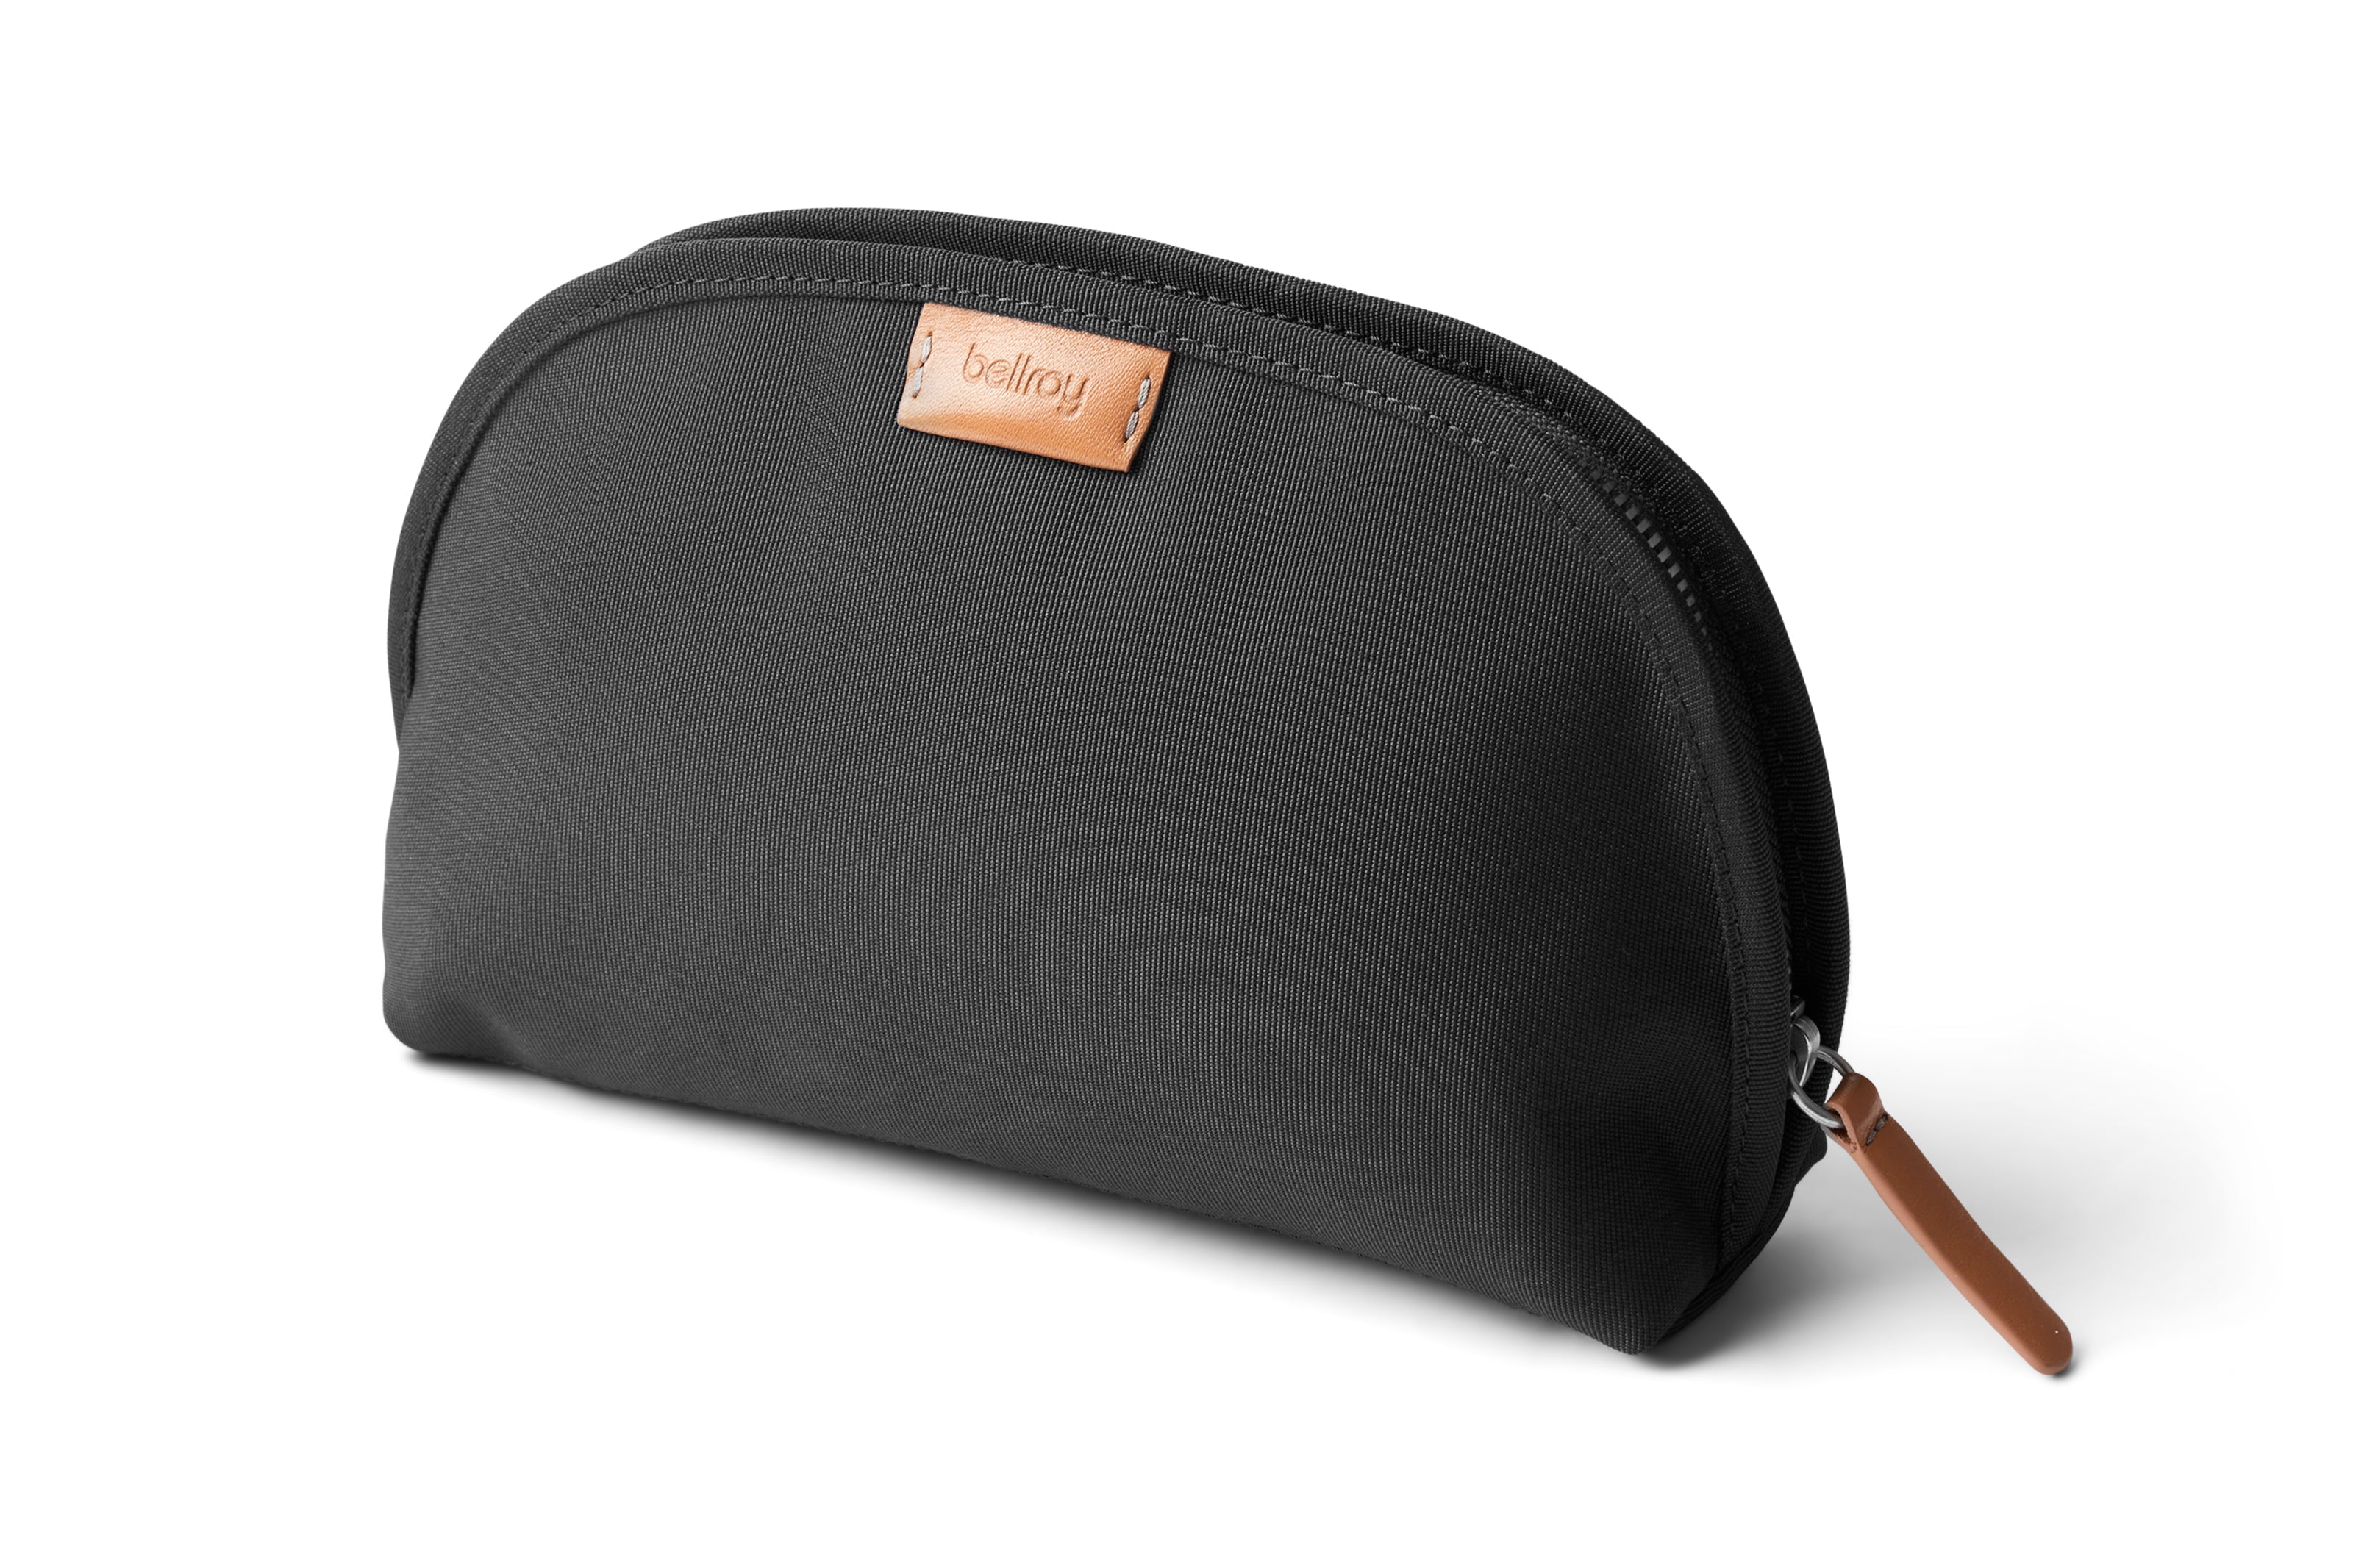 Bellroy | Classic Pouch